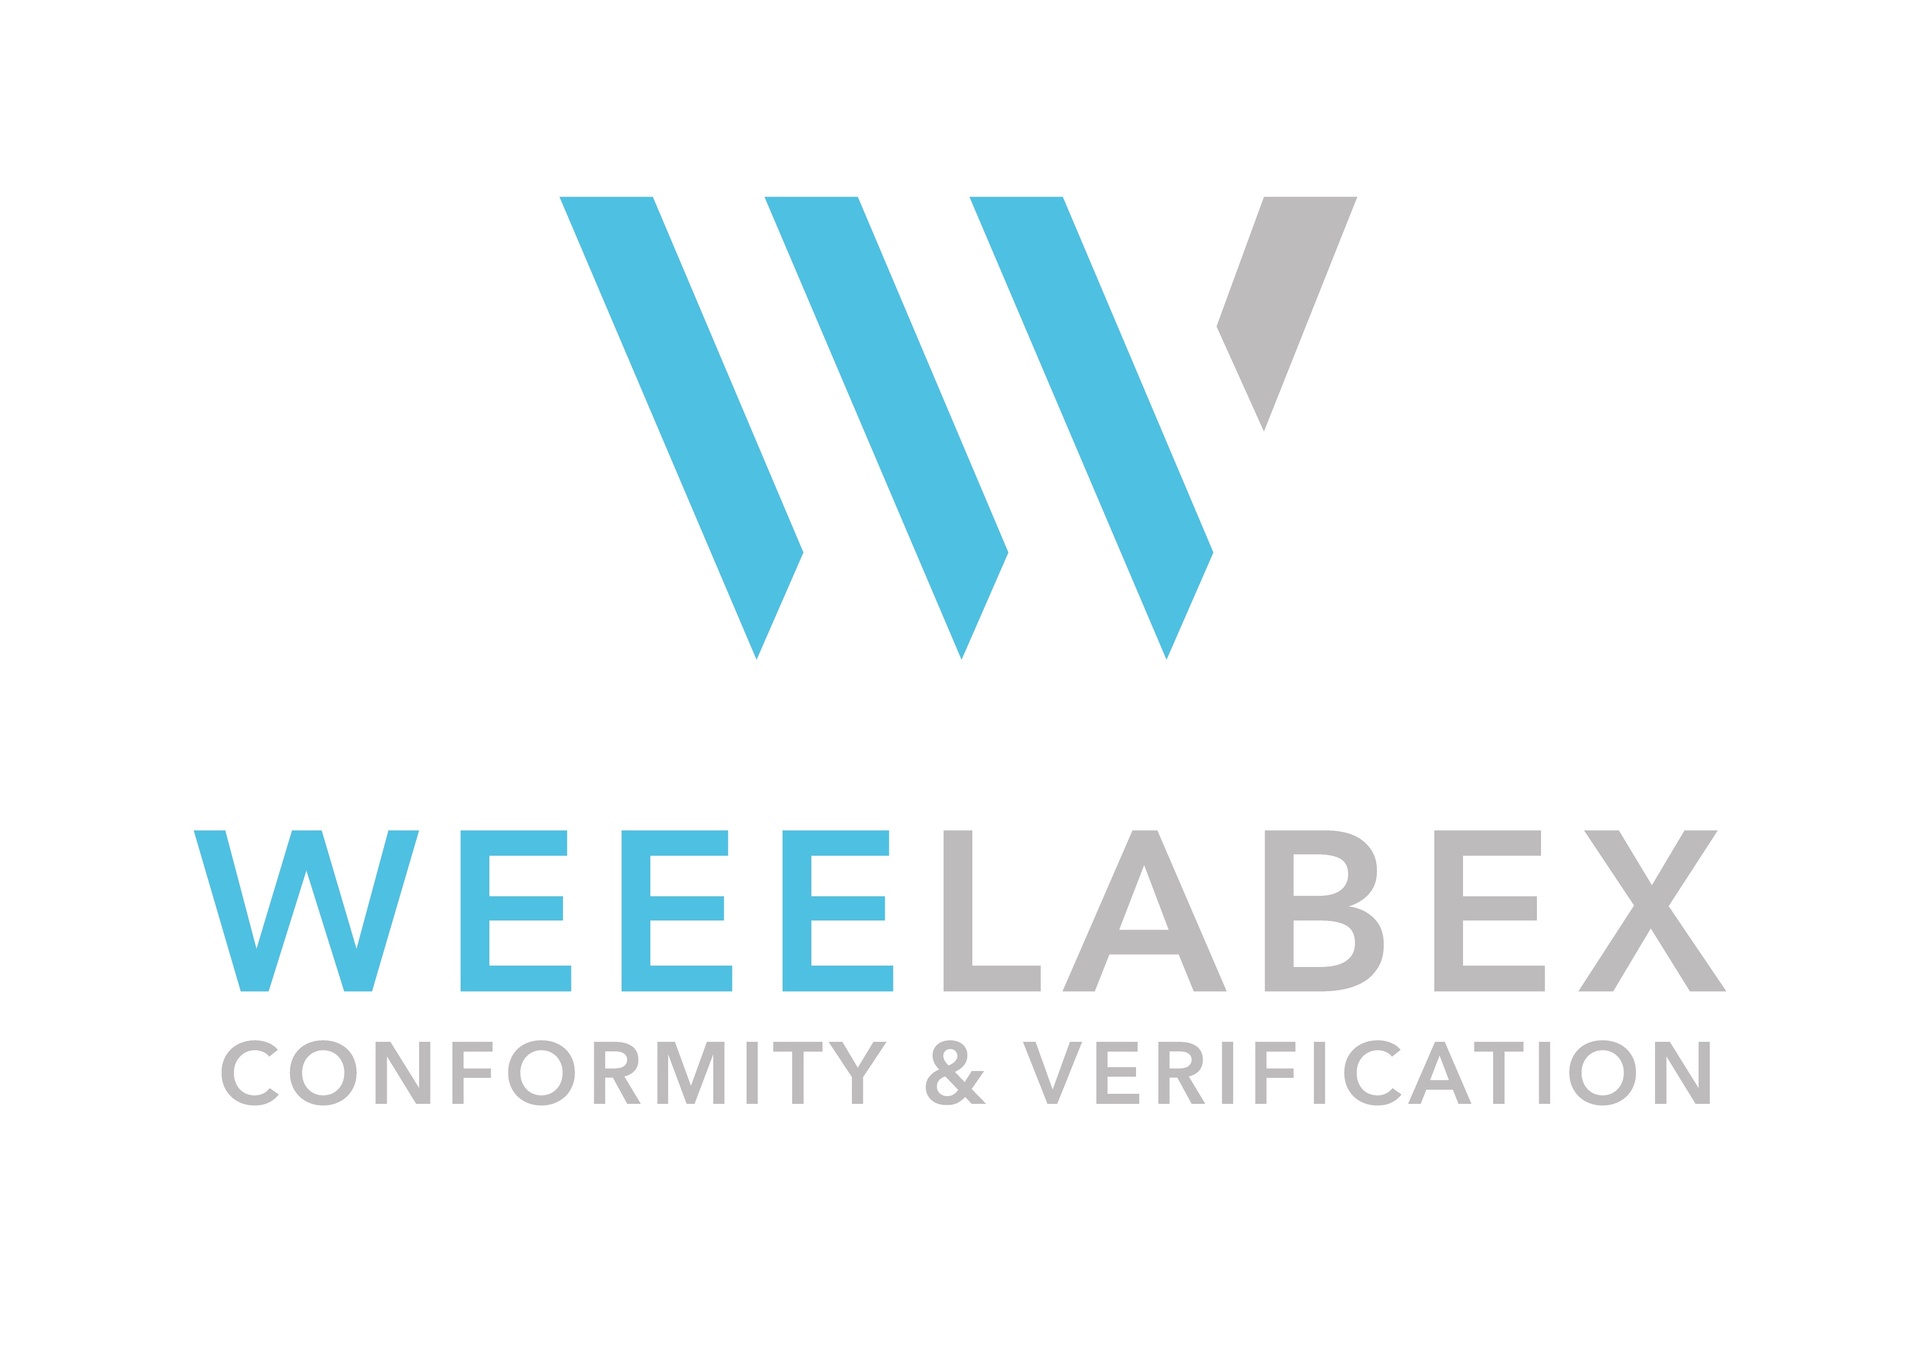 GAP ICE receives the WEEELABEX Certification for it's Refrigeration Recycling Processes